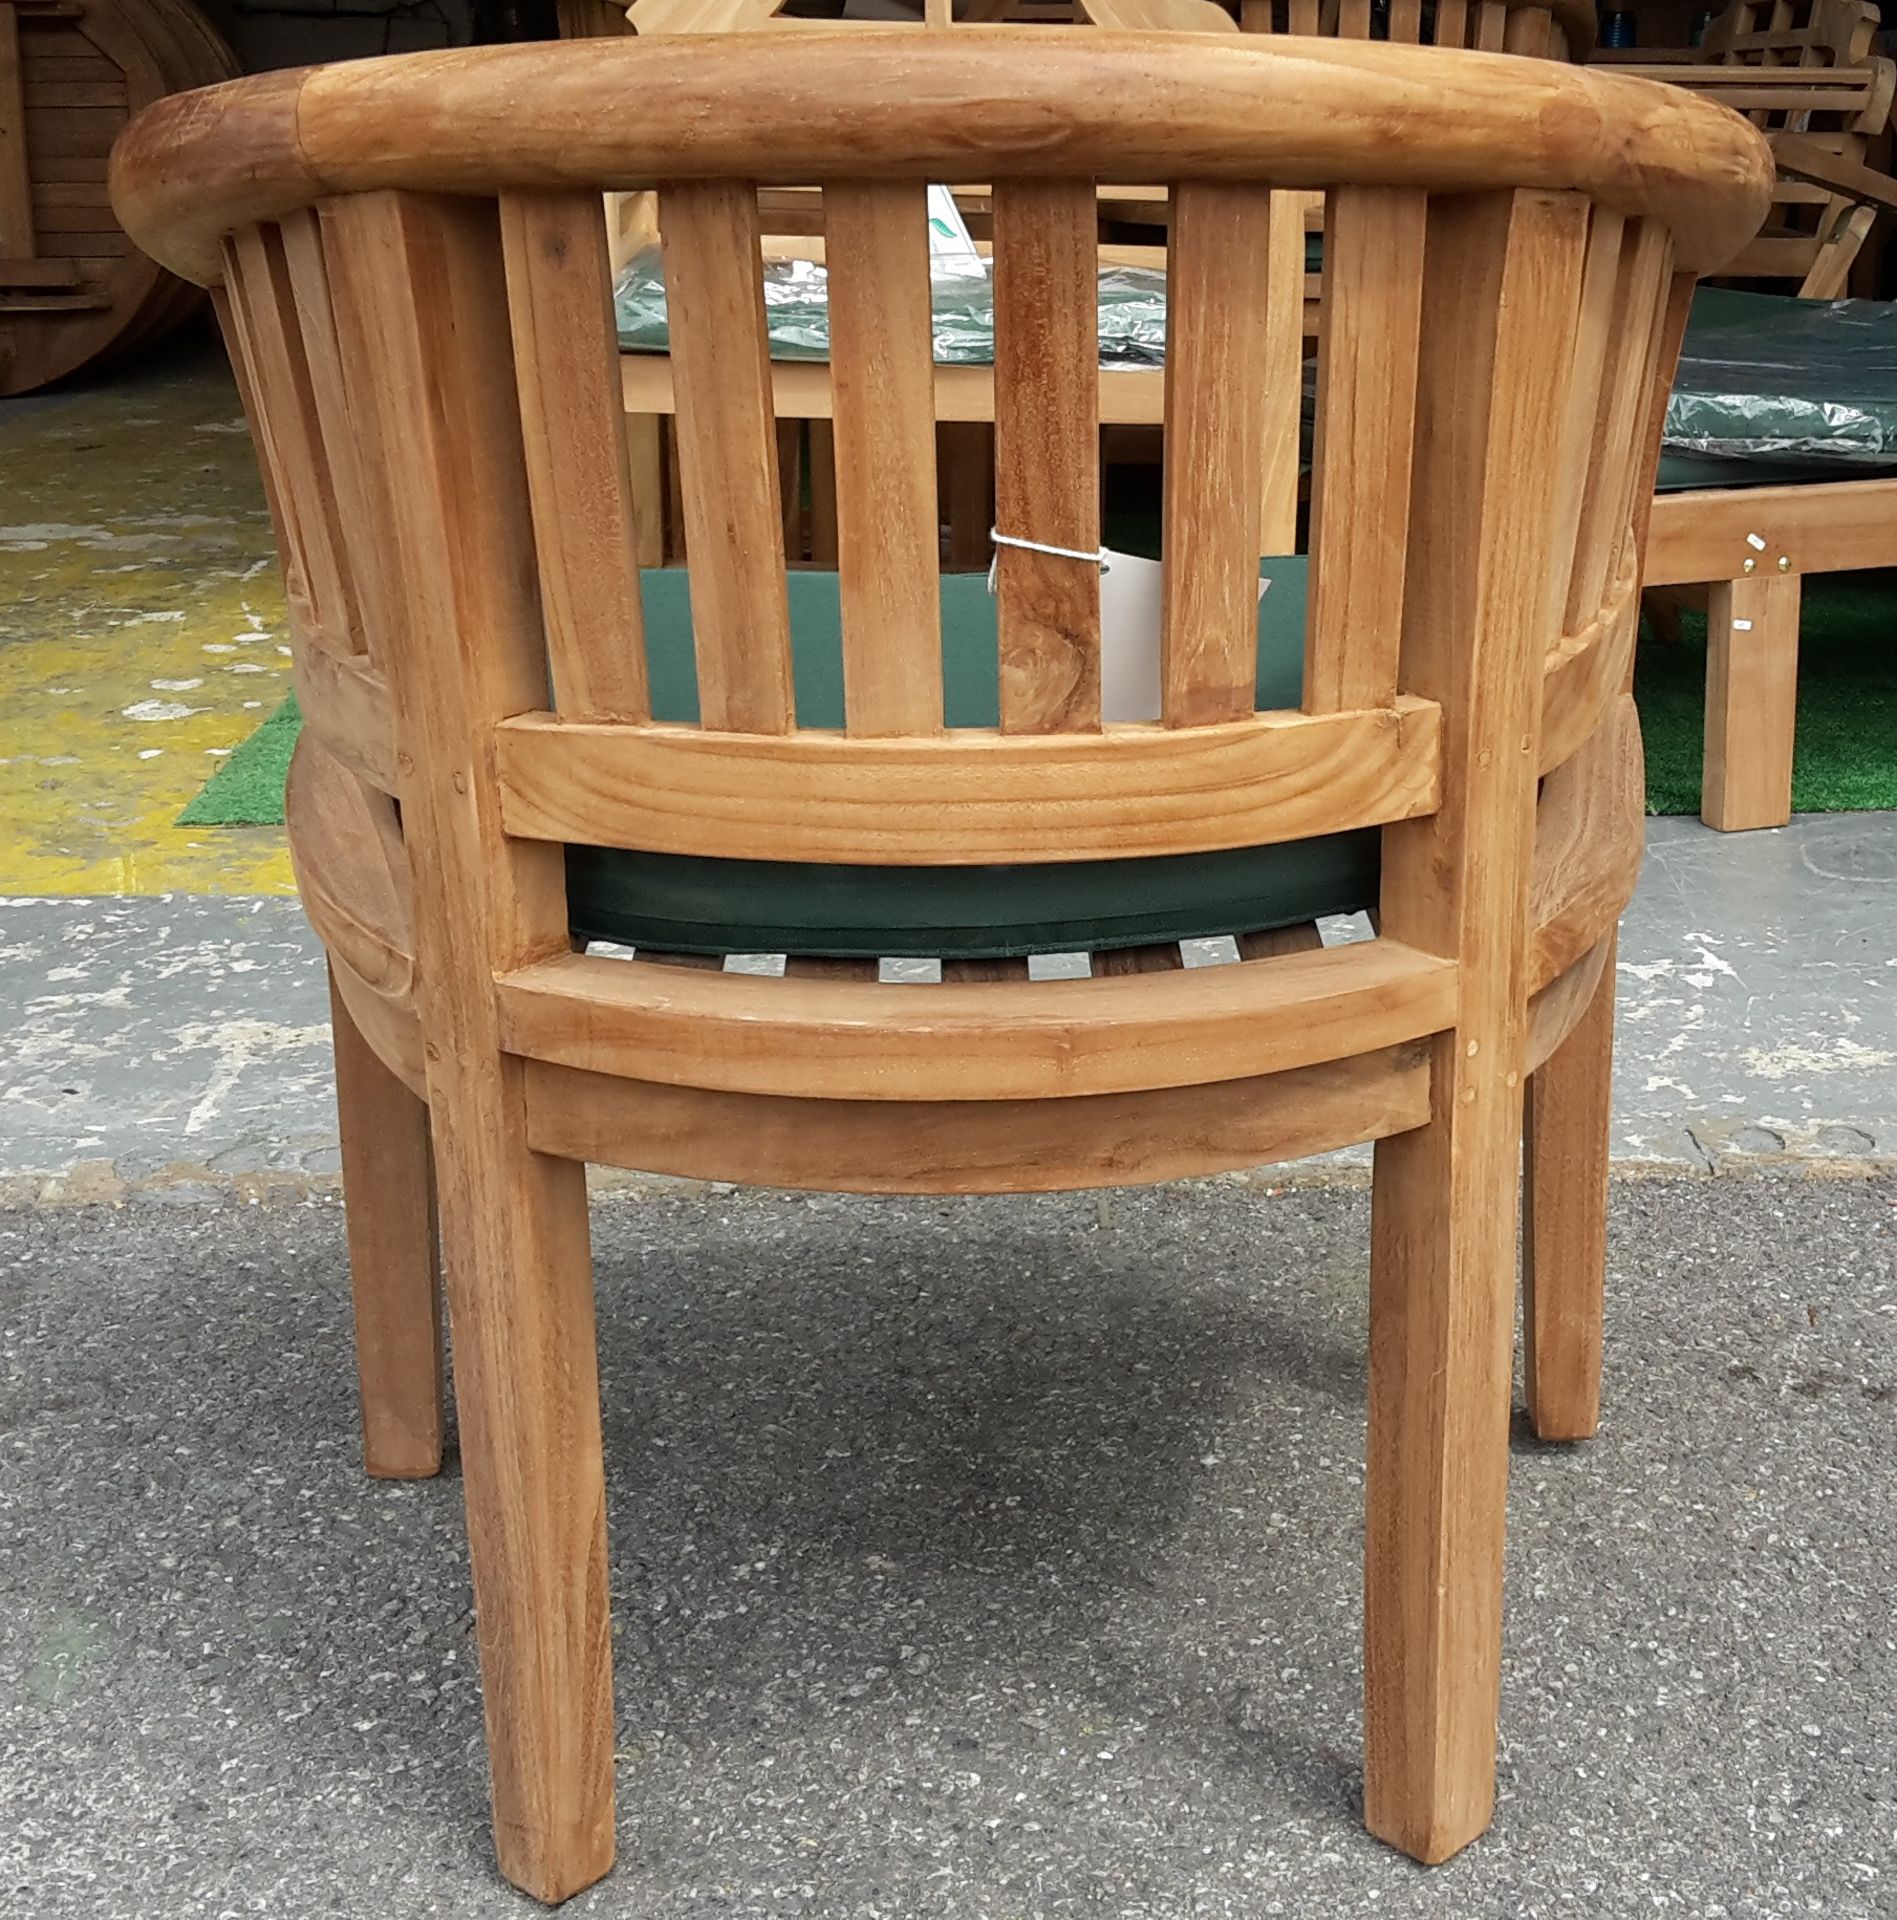 V Brand New TEAK Lutyens Garden Chair - Made From Grade A Plantation Teak RRP £199 NOTE: Item Is - Image 2 of 5